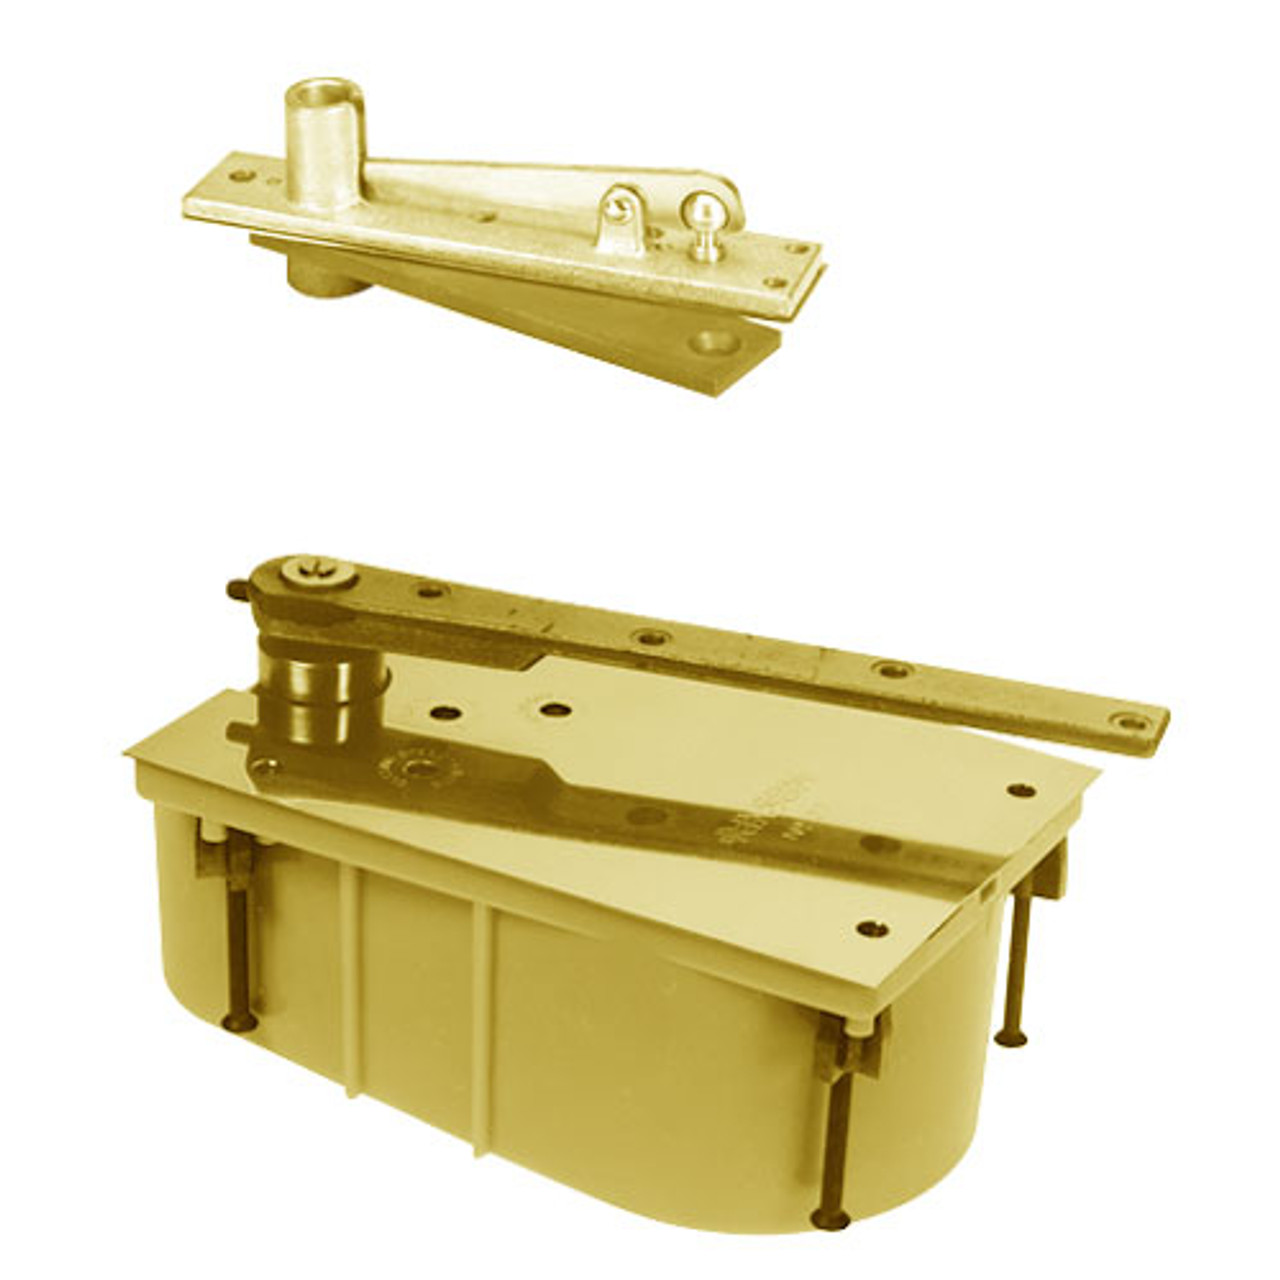 28-85N-554-CWF-LH-605 Rixson 28 Series Heavy Duty Single Acting Center Hung Floor Closer with Concealed Arm in Bright Brass Finish